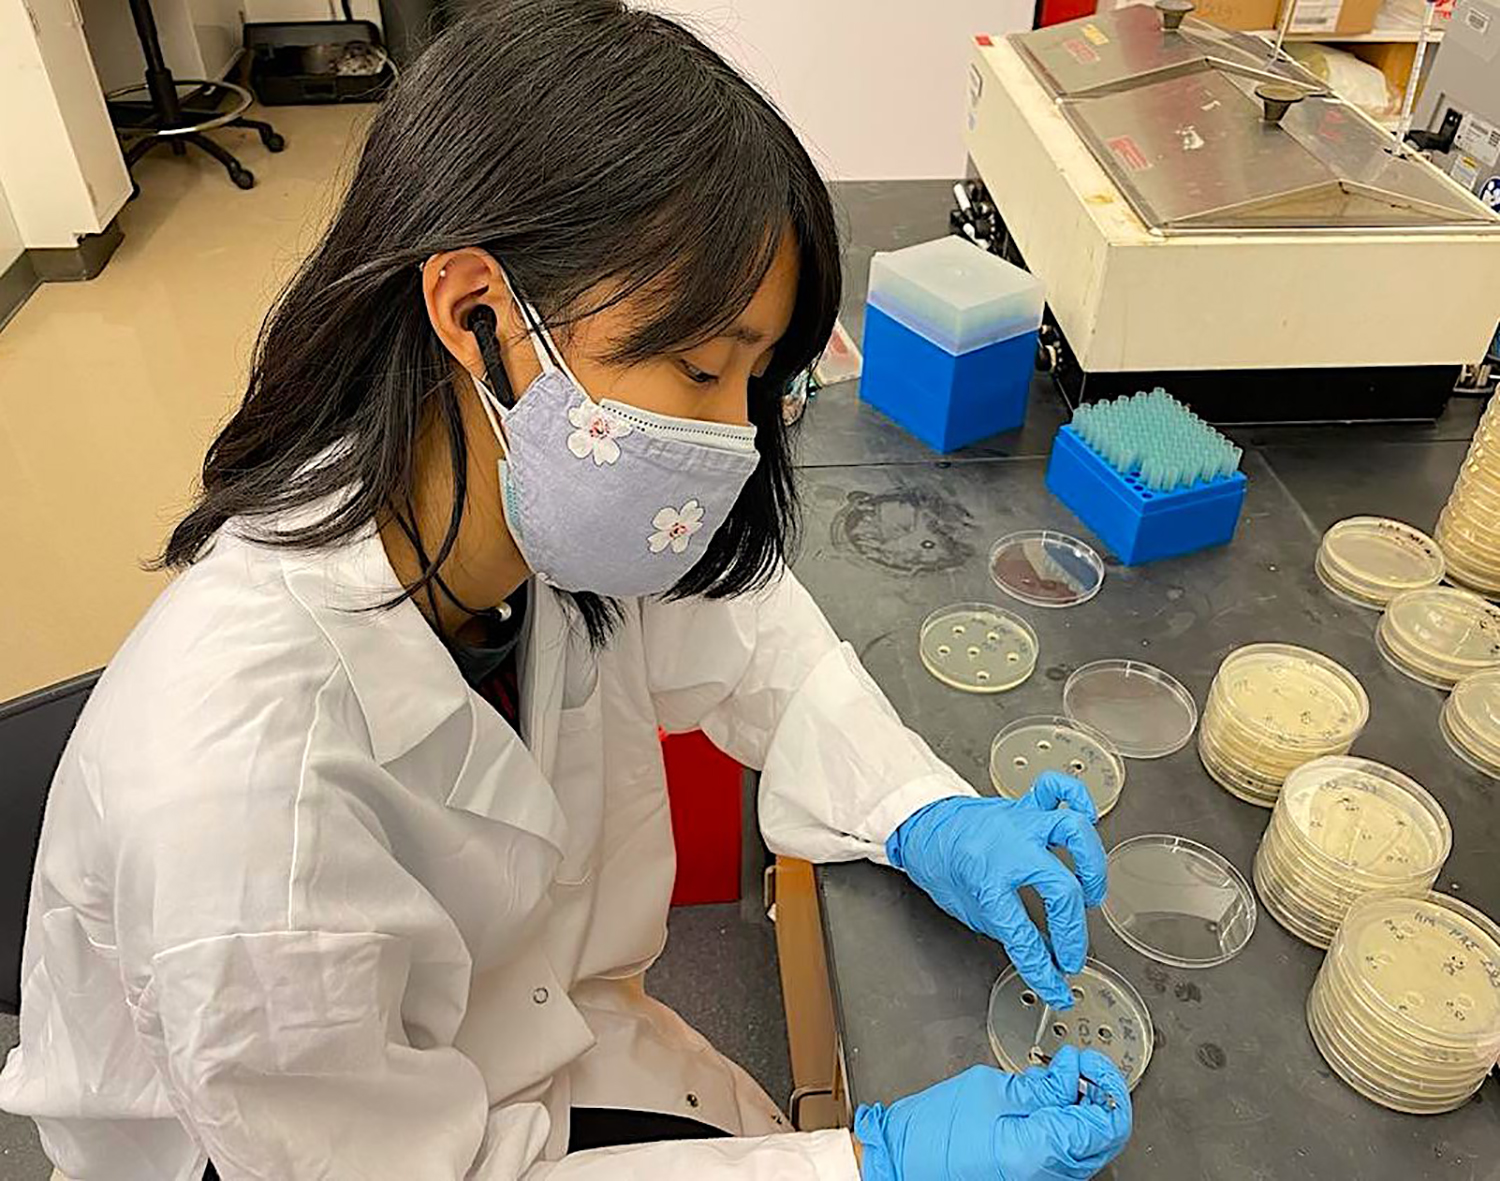 Student researcher Maya Hoon working with agar plates in a lab